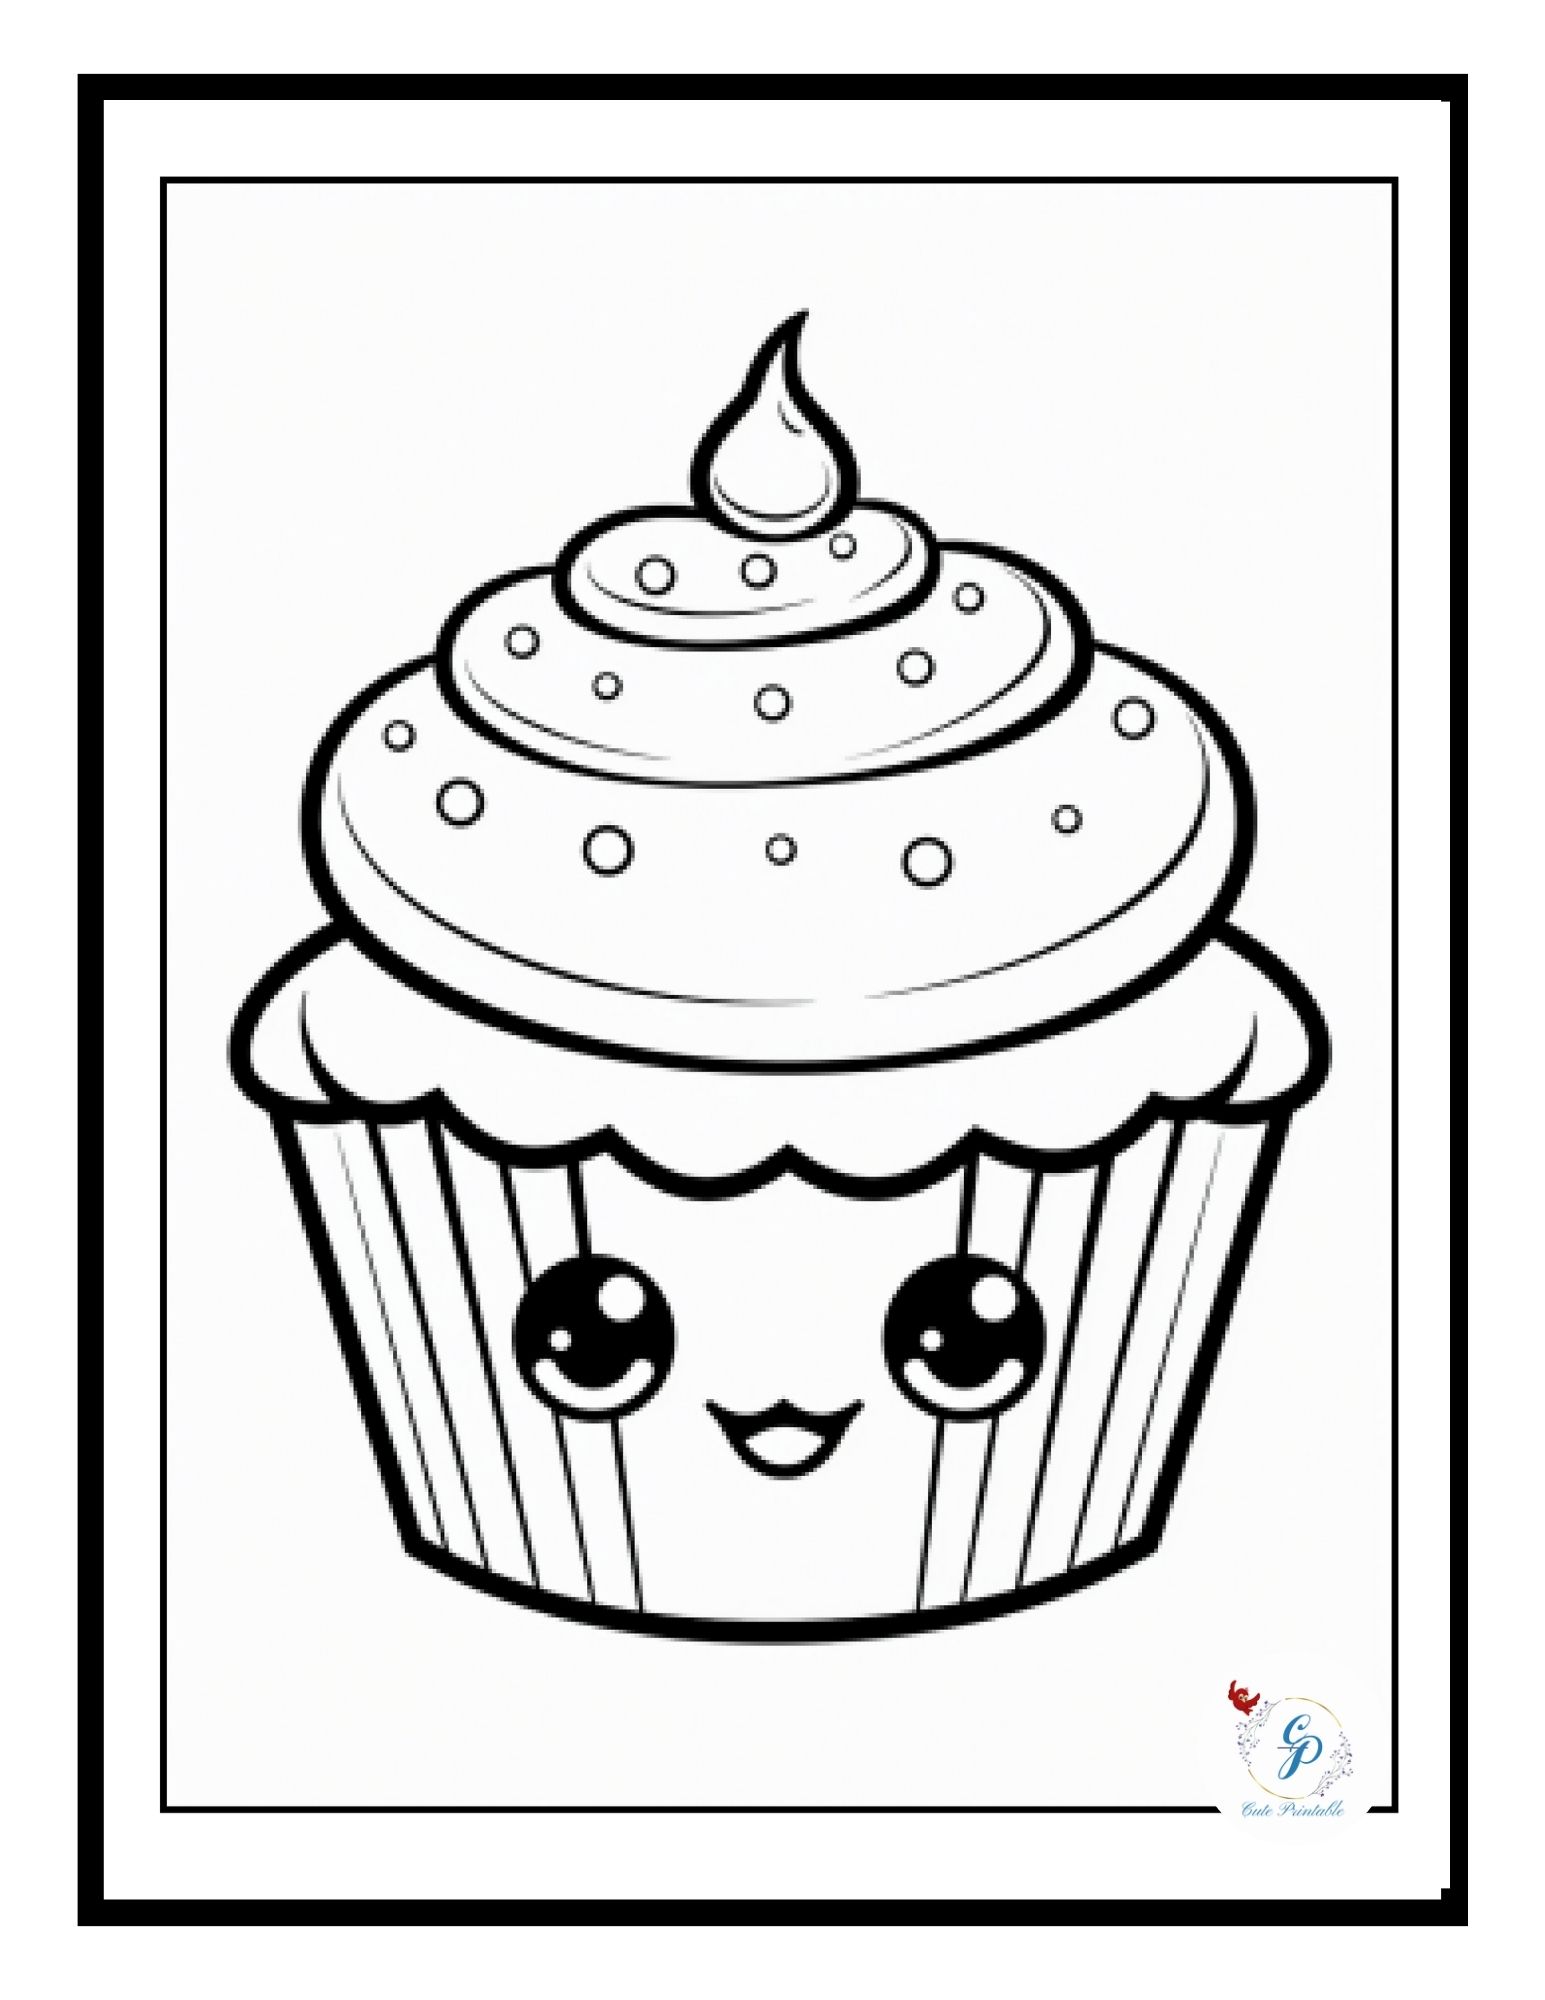 65 Free Cute Kawaii Food Coloring Pages for Kids & Adults | Cute Printable